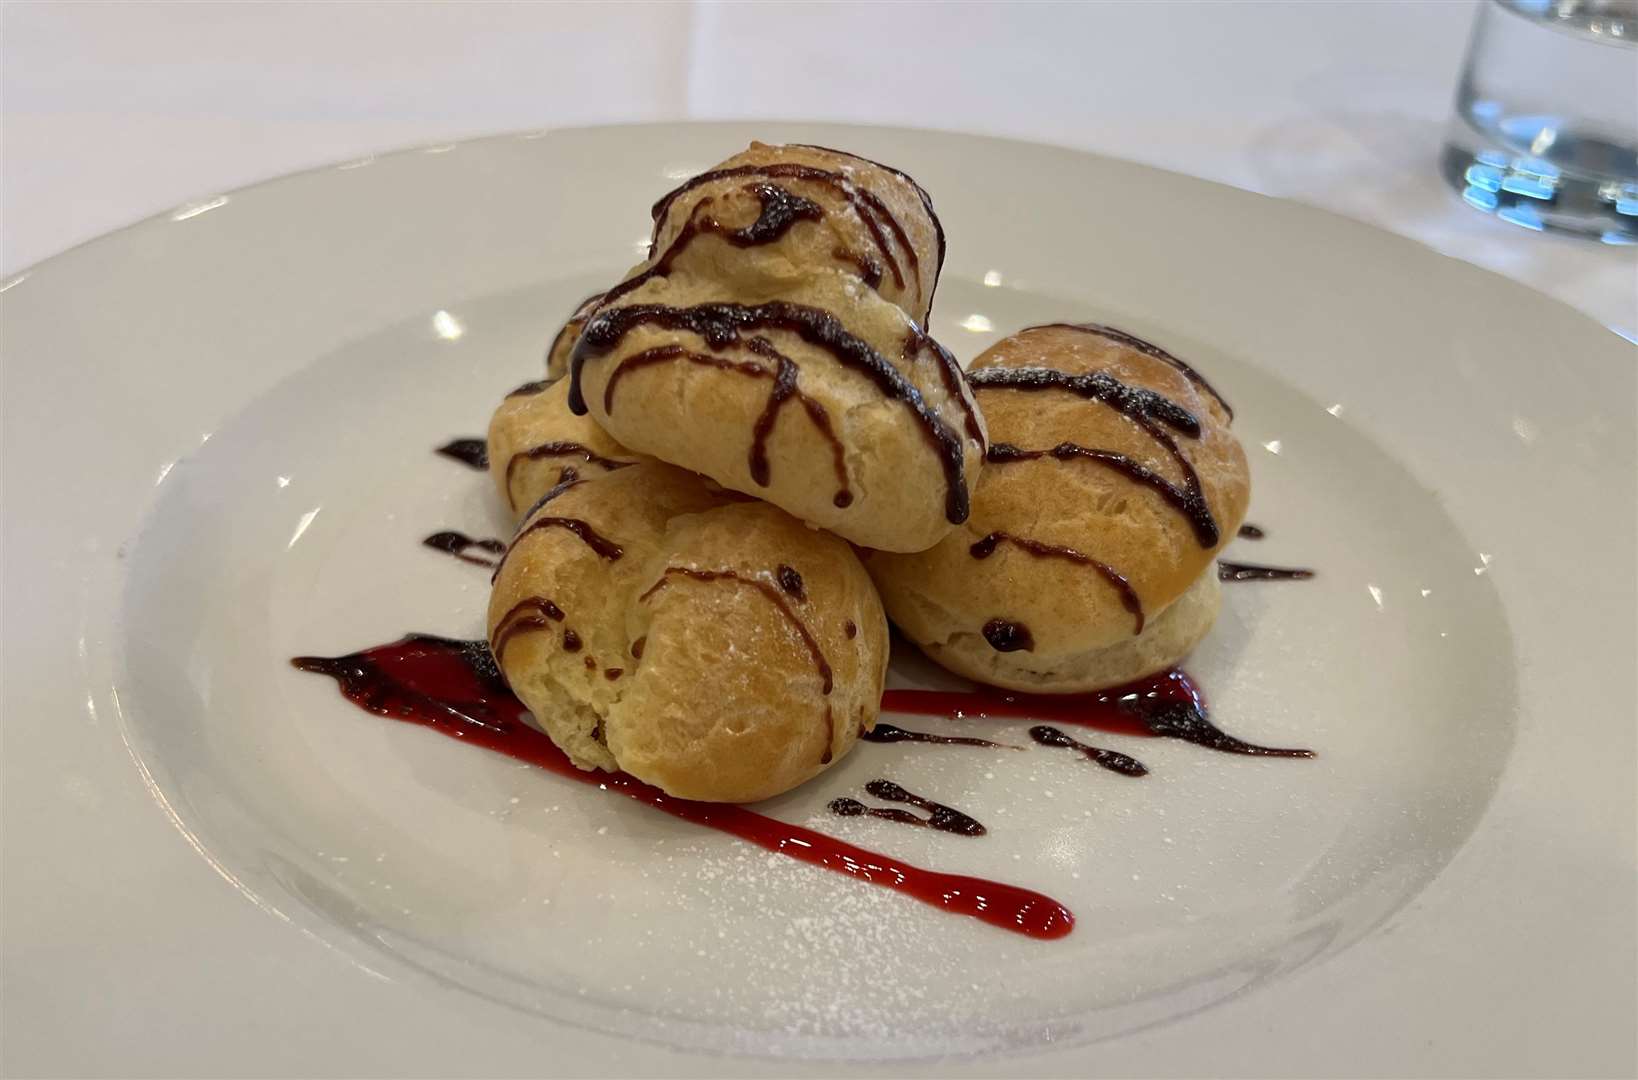 Profiteroles - hard to resist and that drizzle of raspberry was well judged